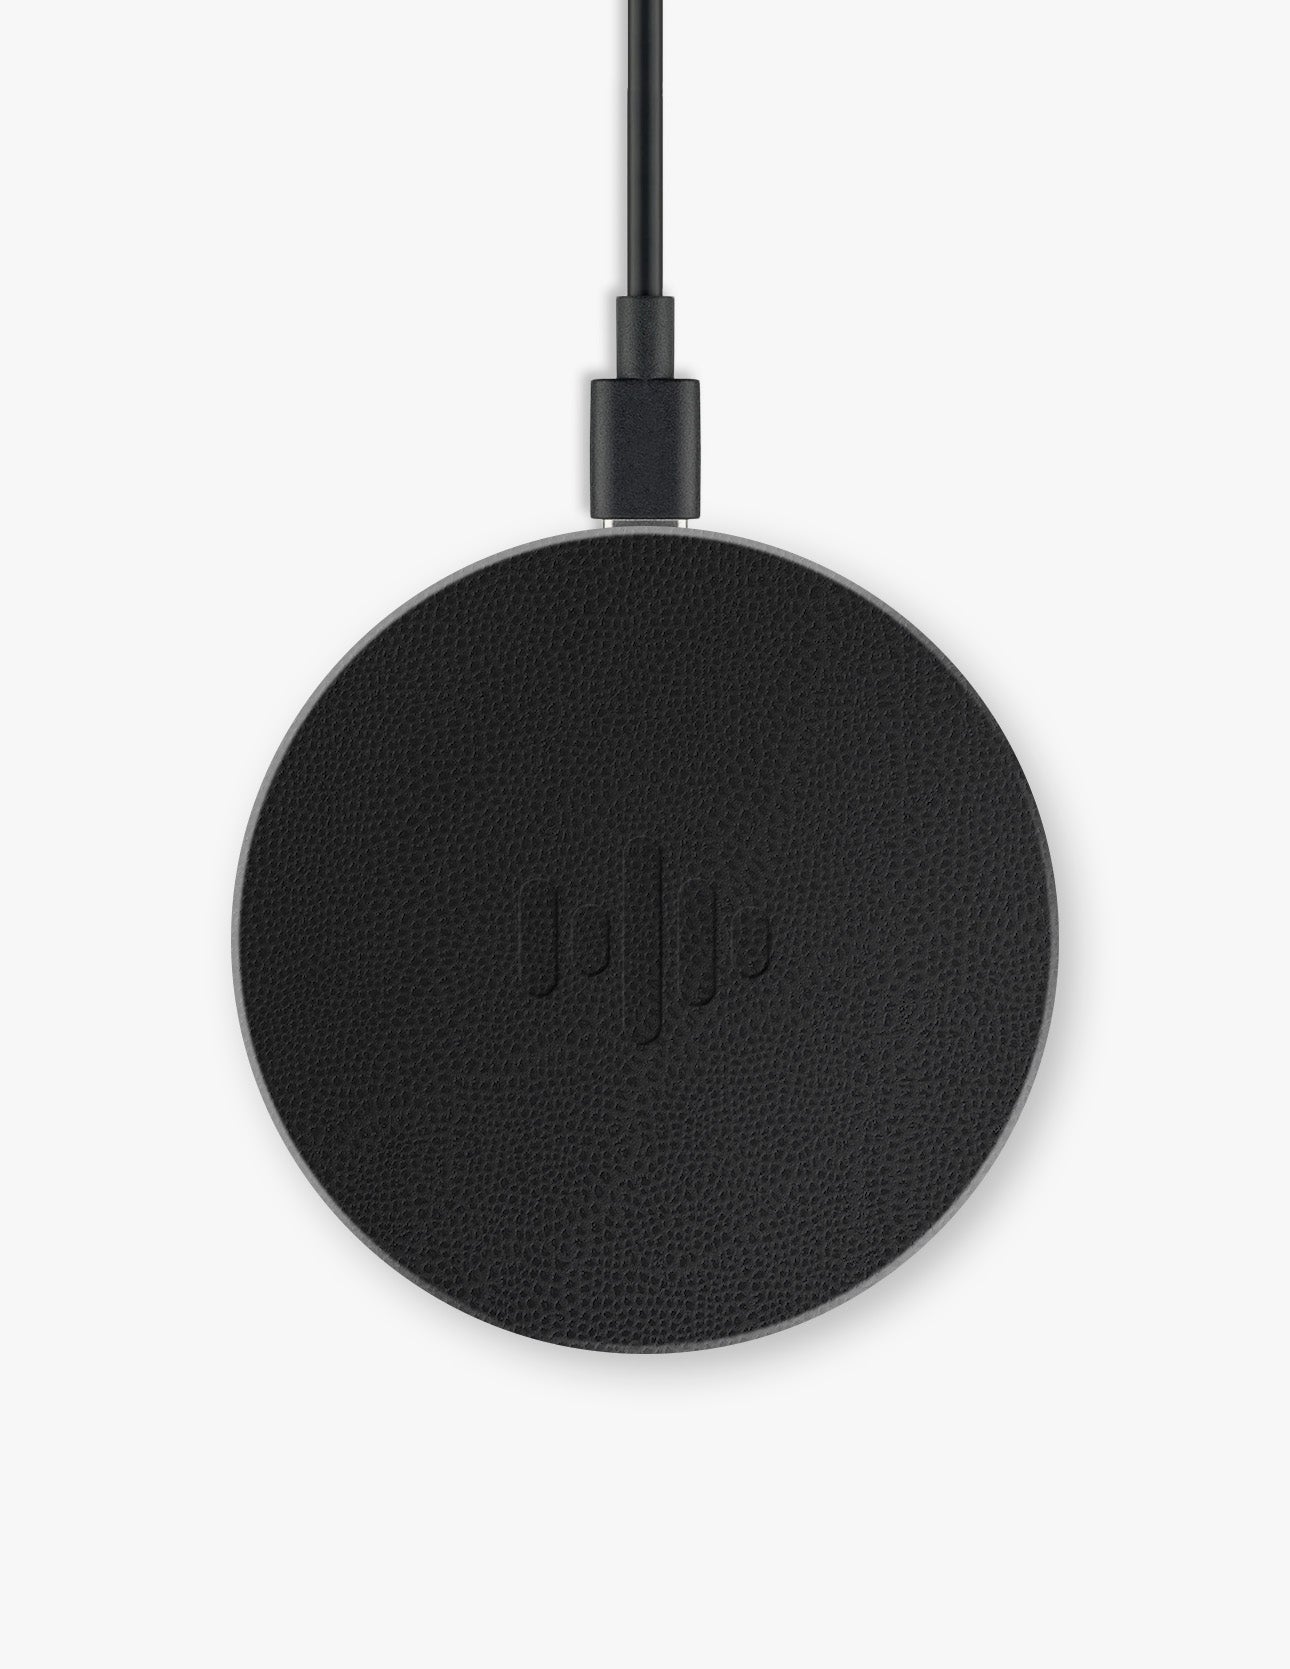 Wireless QI Charger in black leather